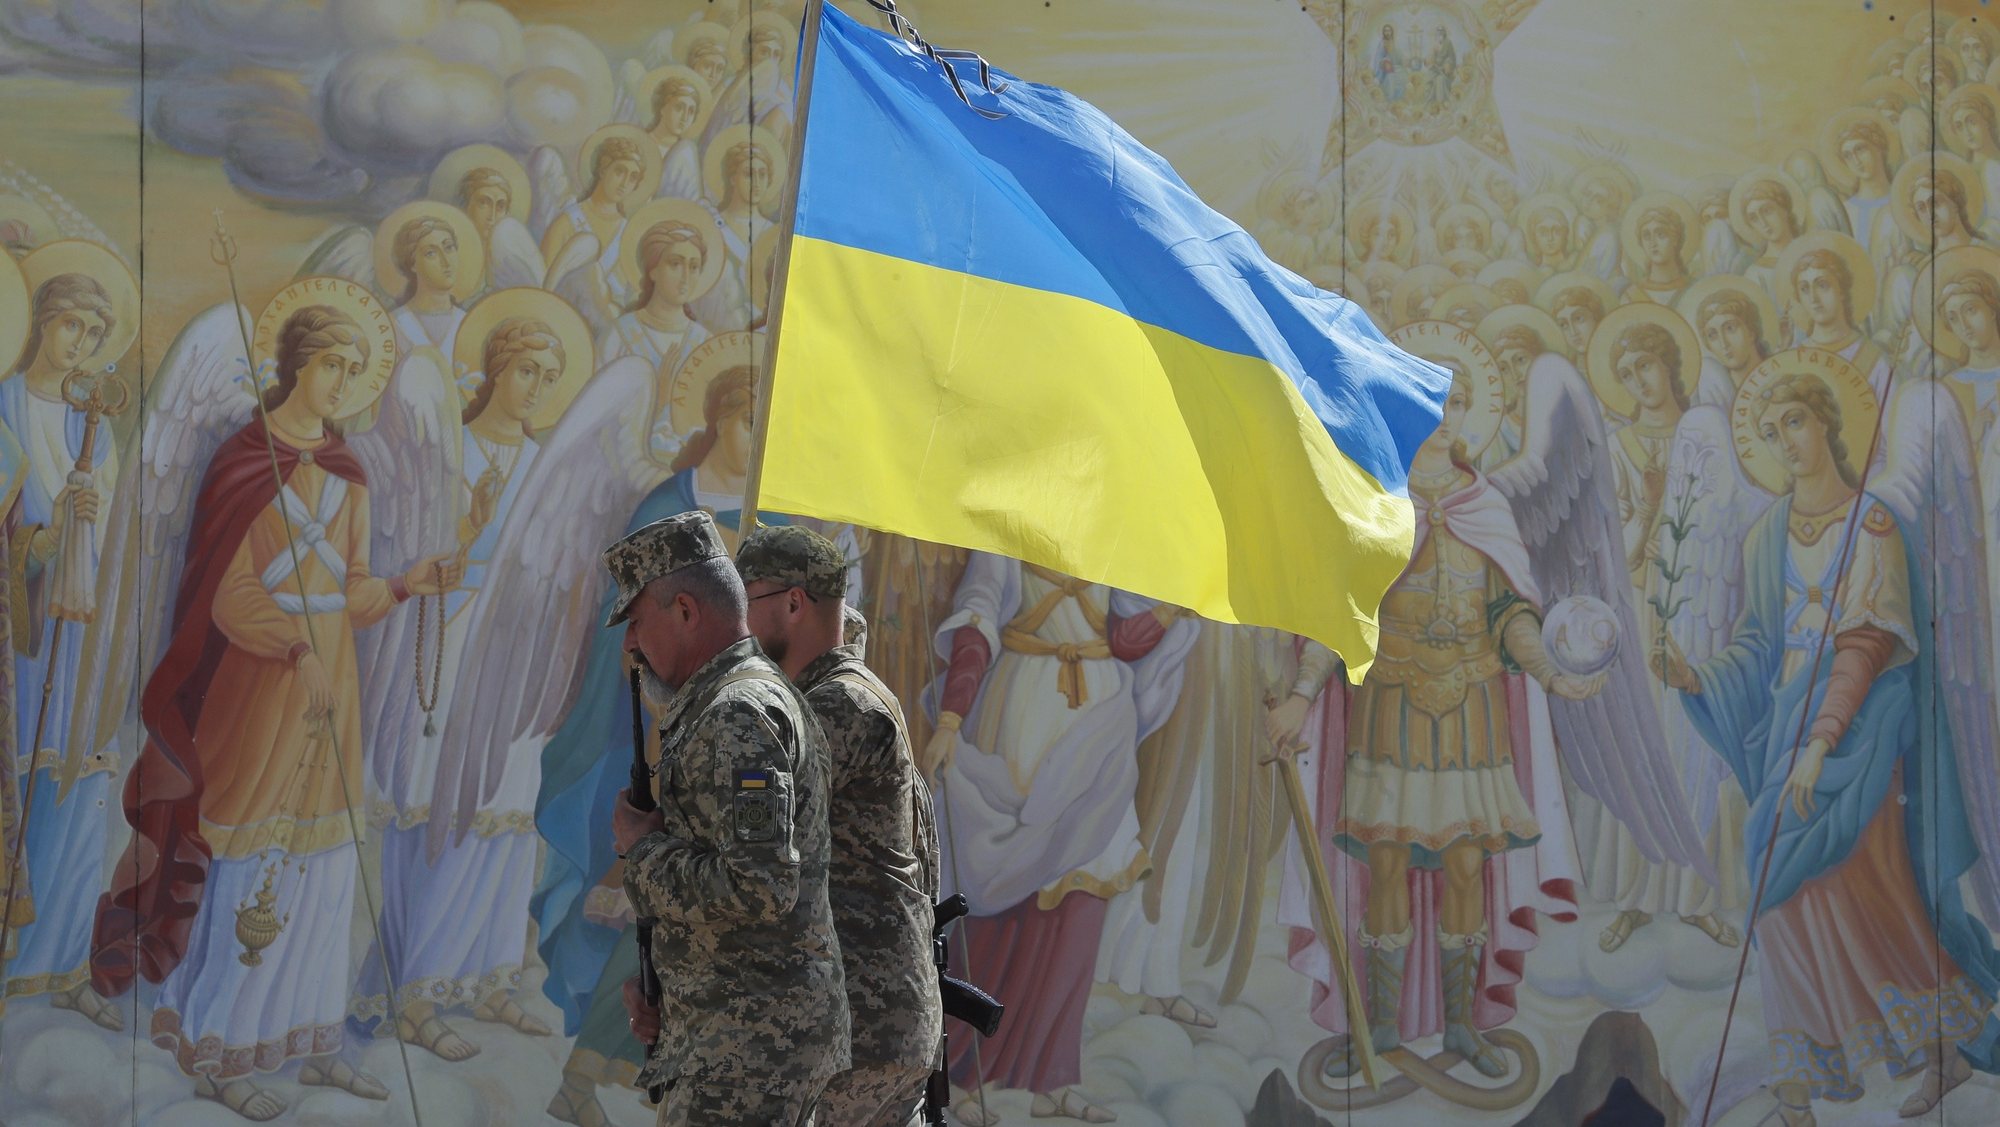 epa10169878 Ukrainian soldiers carry the national flag in front of frescos at St. Mikhailovsky Cathedral in Kyiv (Kiev), Ukraine, 08 September 2022, amid the Russian invasion. Russian troops entered Ukraine on 24 February 2022 starting a conflict that has provoked destruction and a humanitarian crisis.  EPA/SERGEY DOLZHENKO